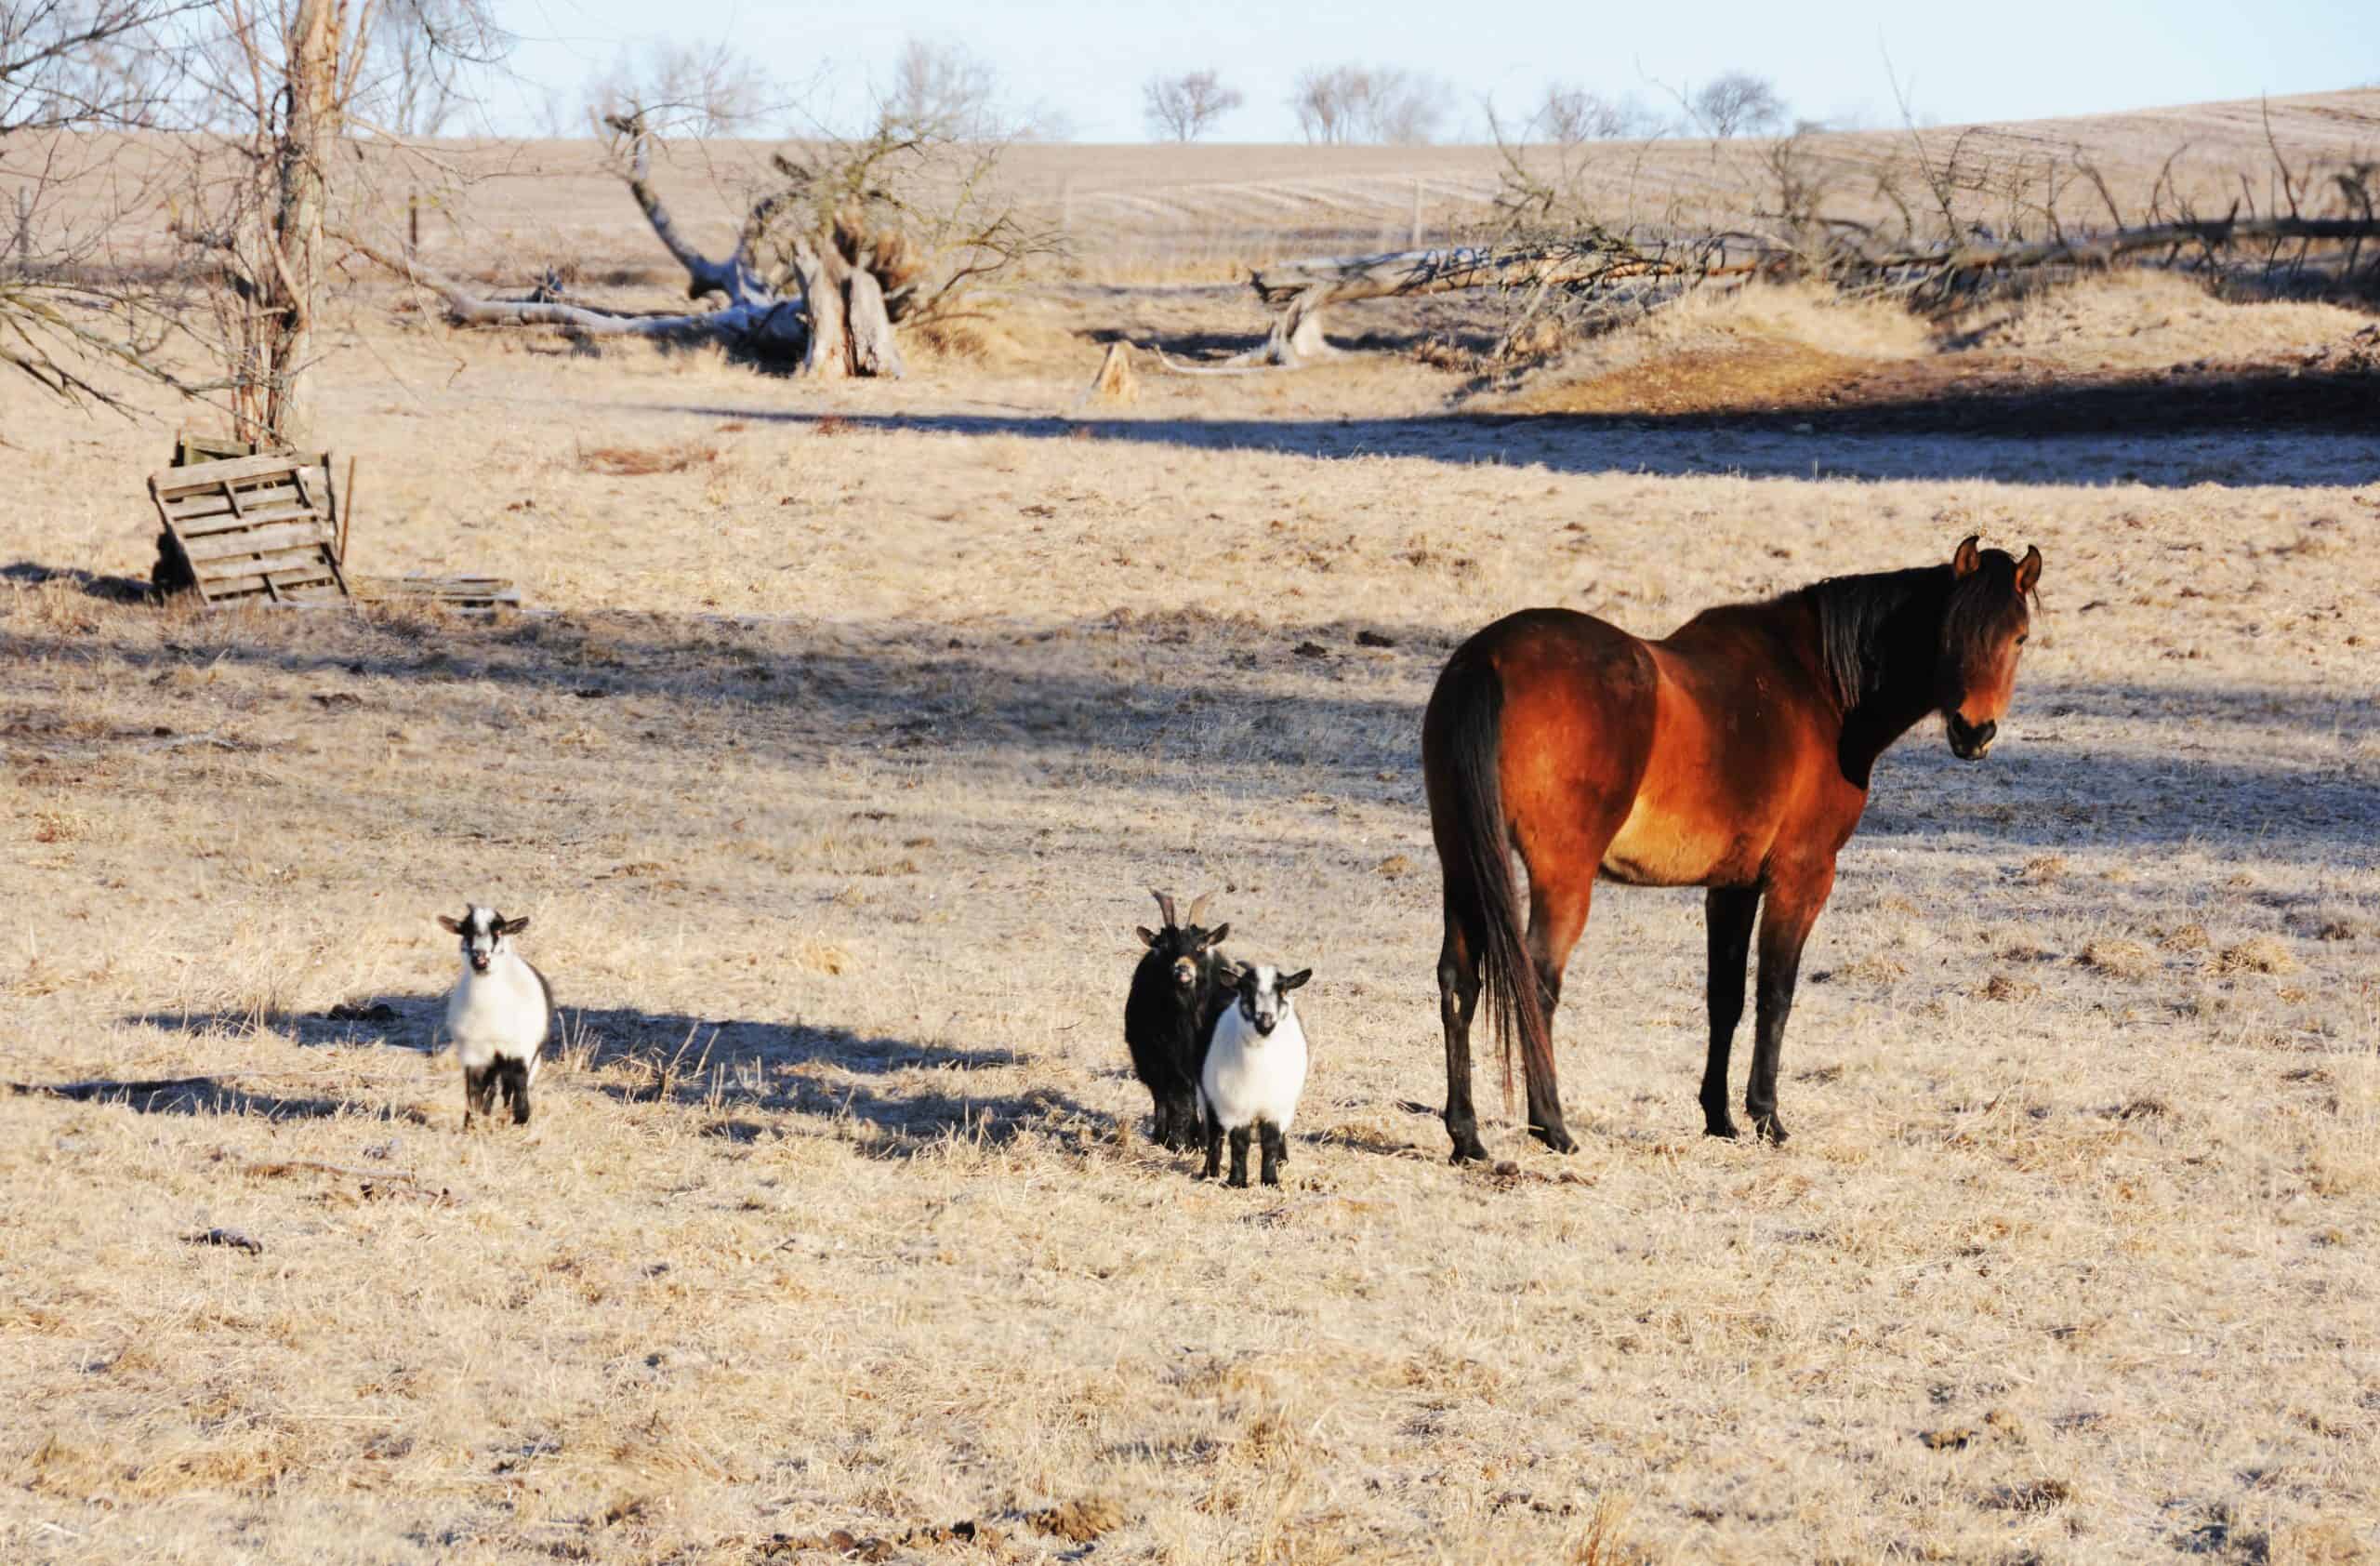 Brown horse in dry pasture with three goats.